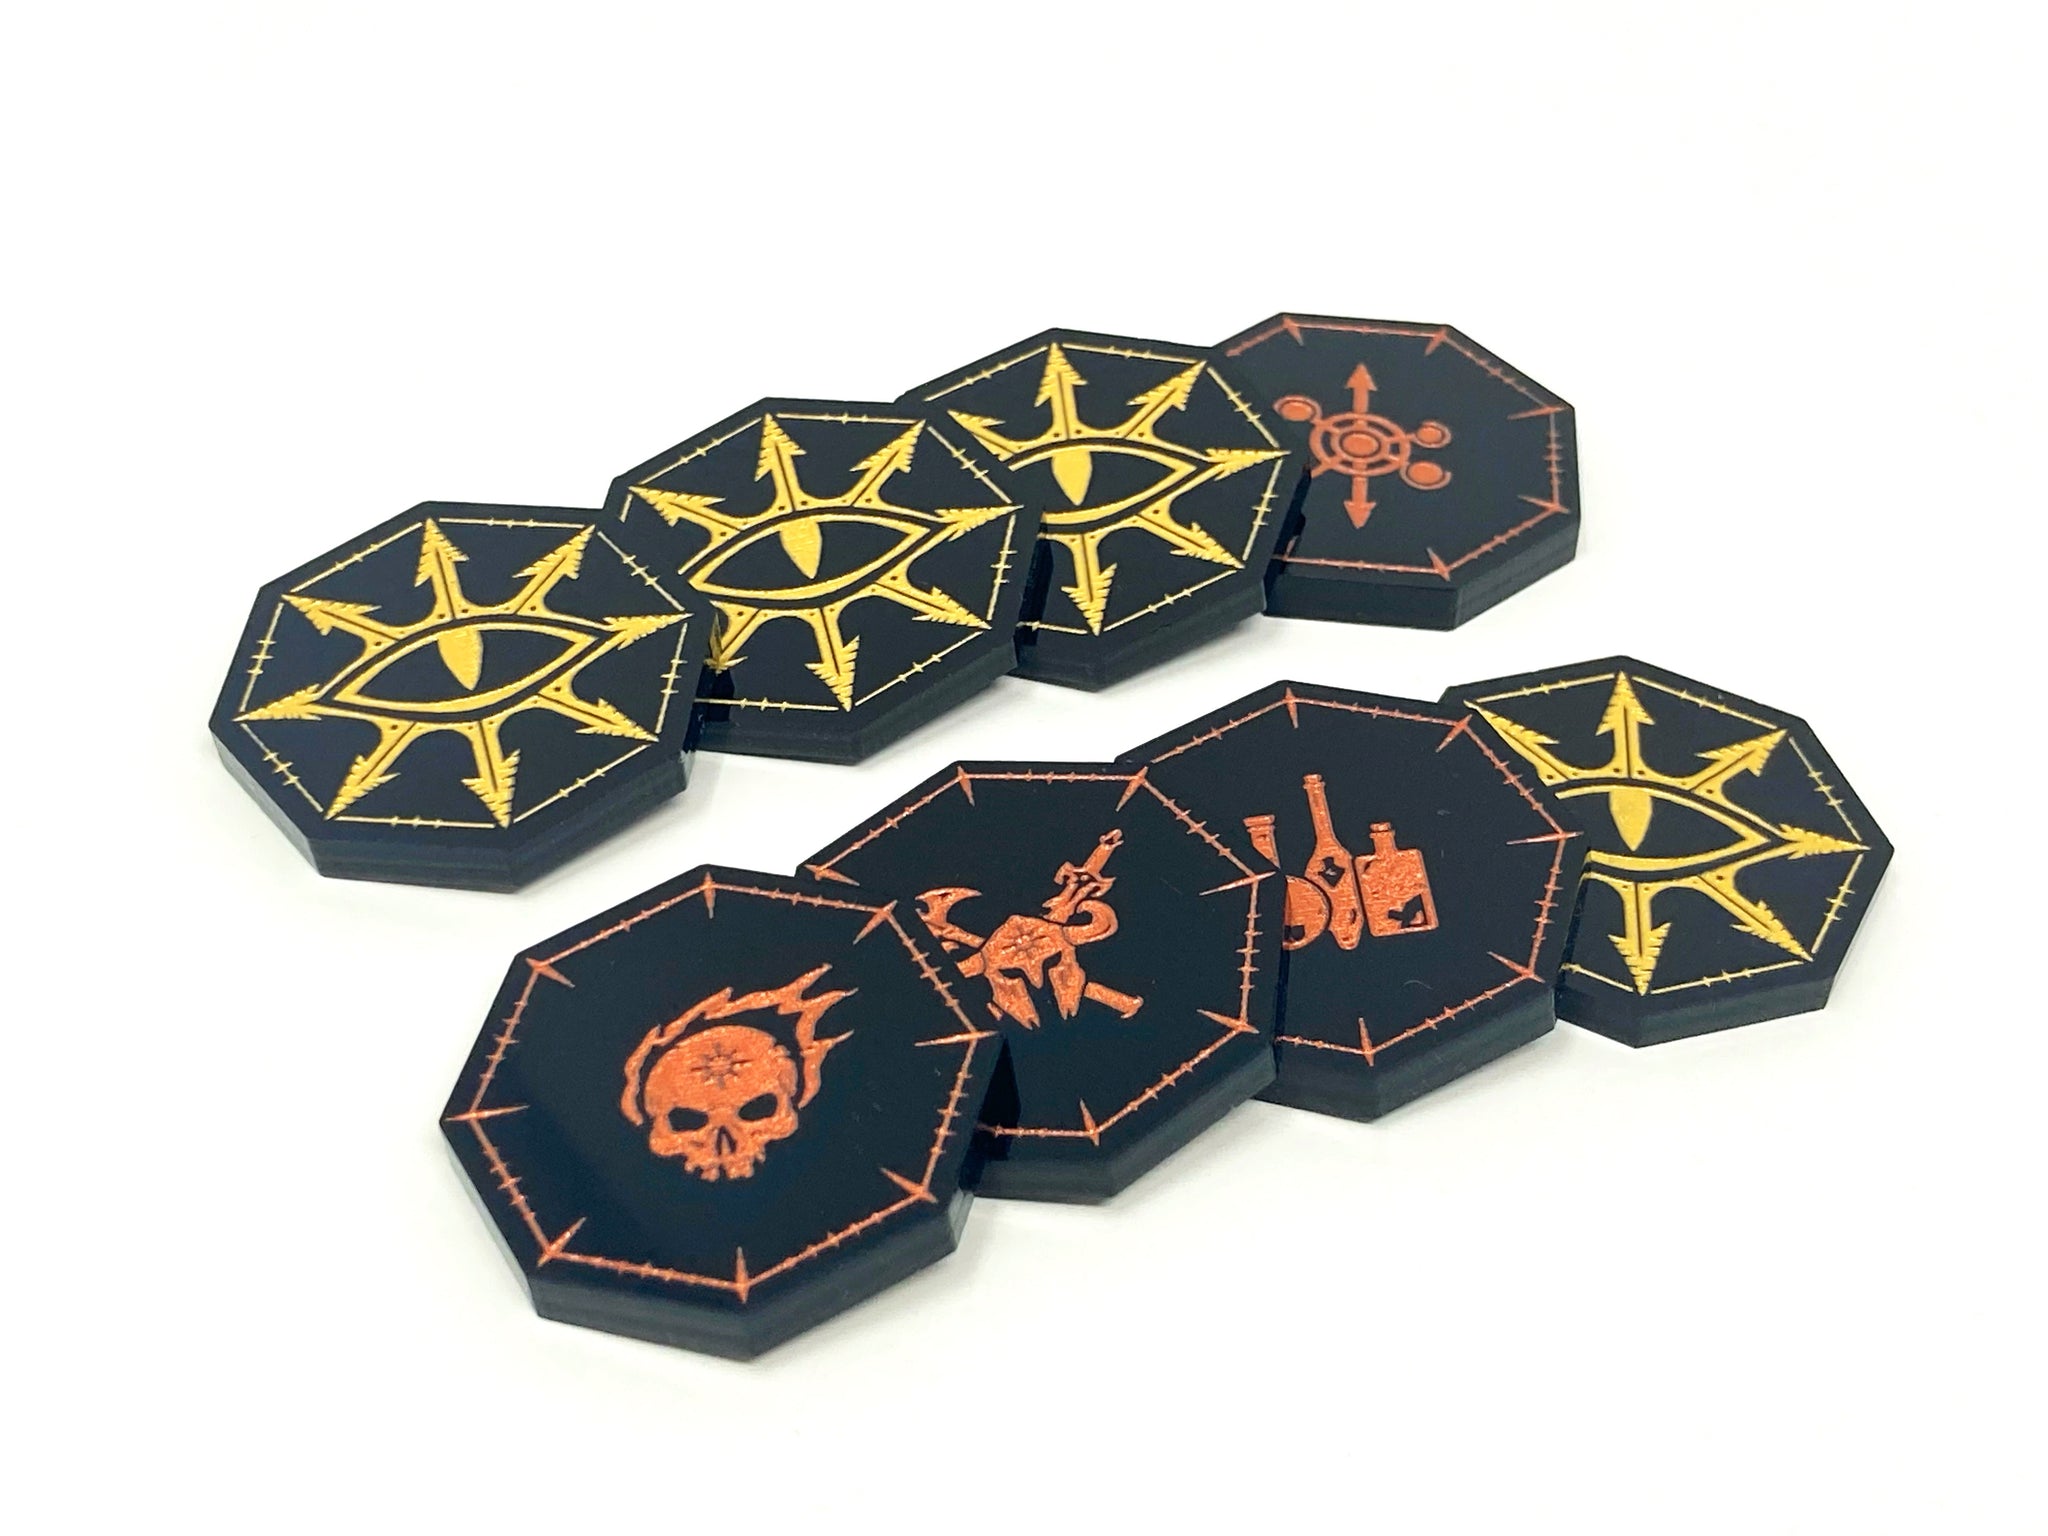 Single player Token set for Warcry